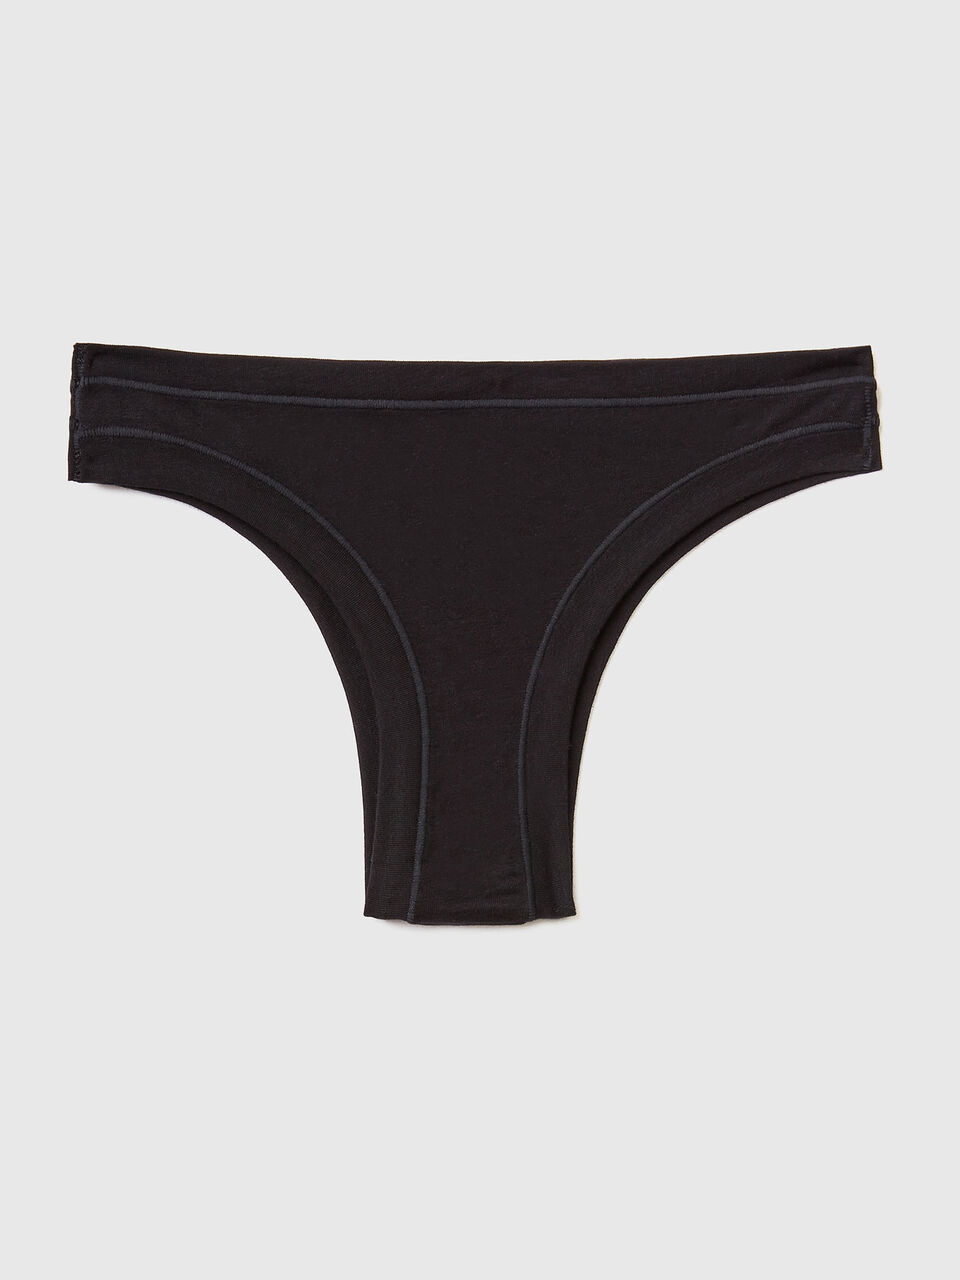 Brazilian panties for women Beverly, color: black — buy for 449 uah